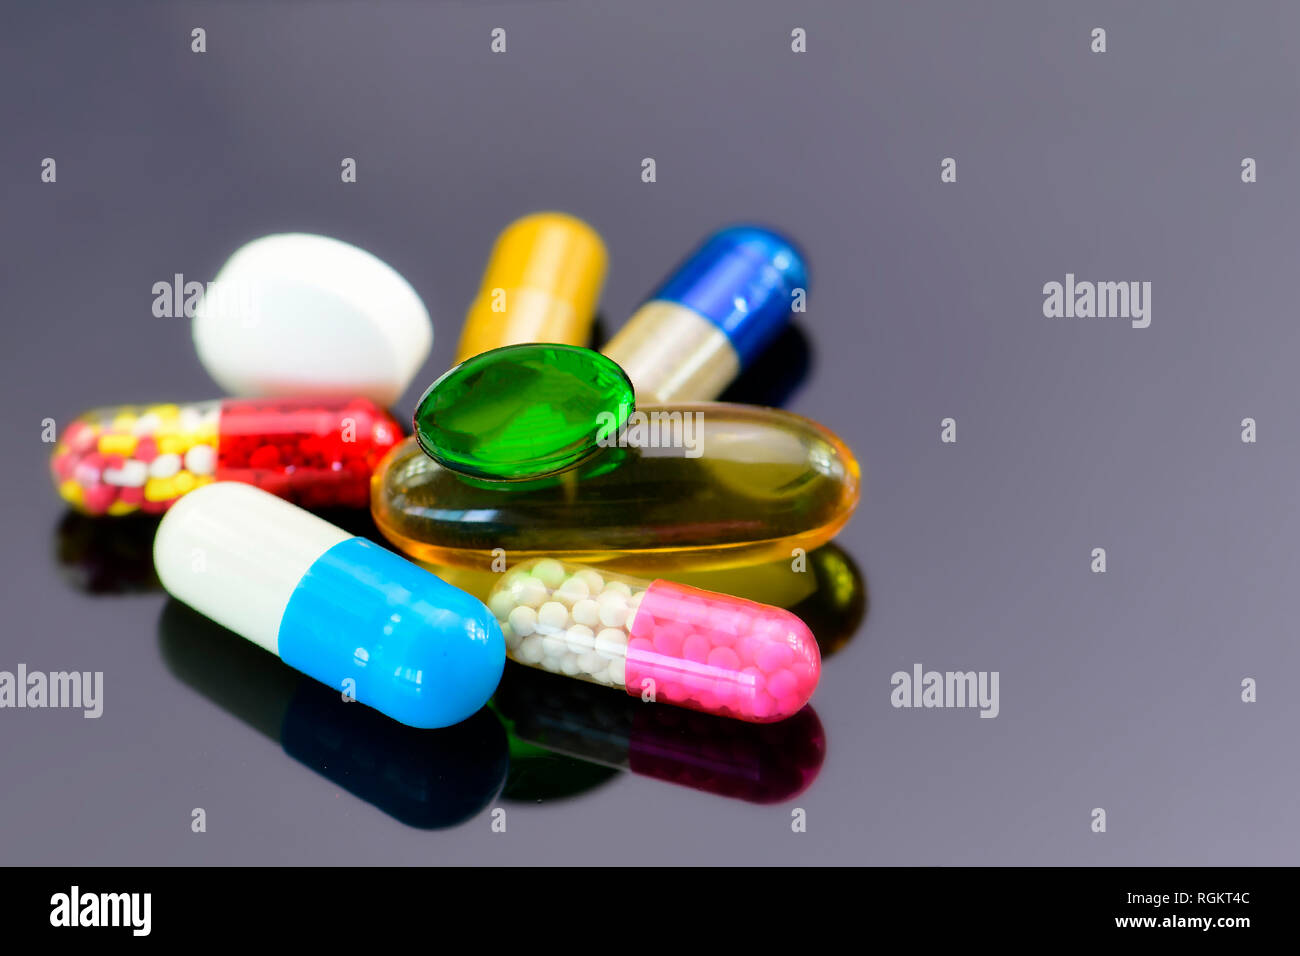 Colorful of oral medications on dark background. Capsule and tablet oral dosage form. Stock Photo